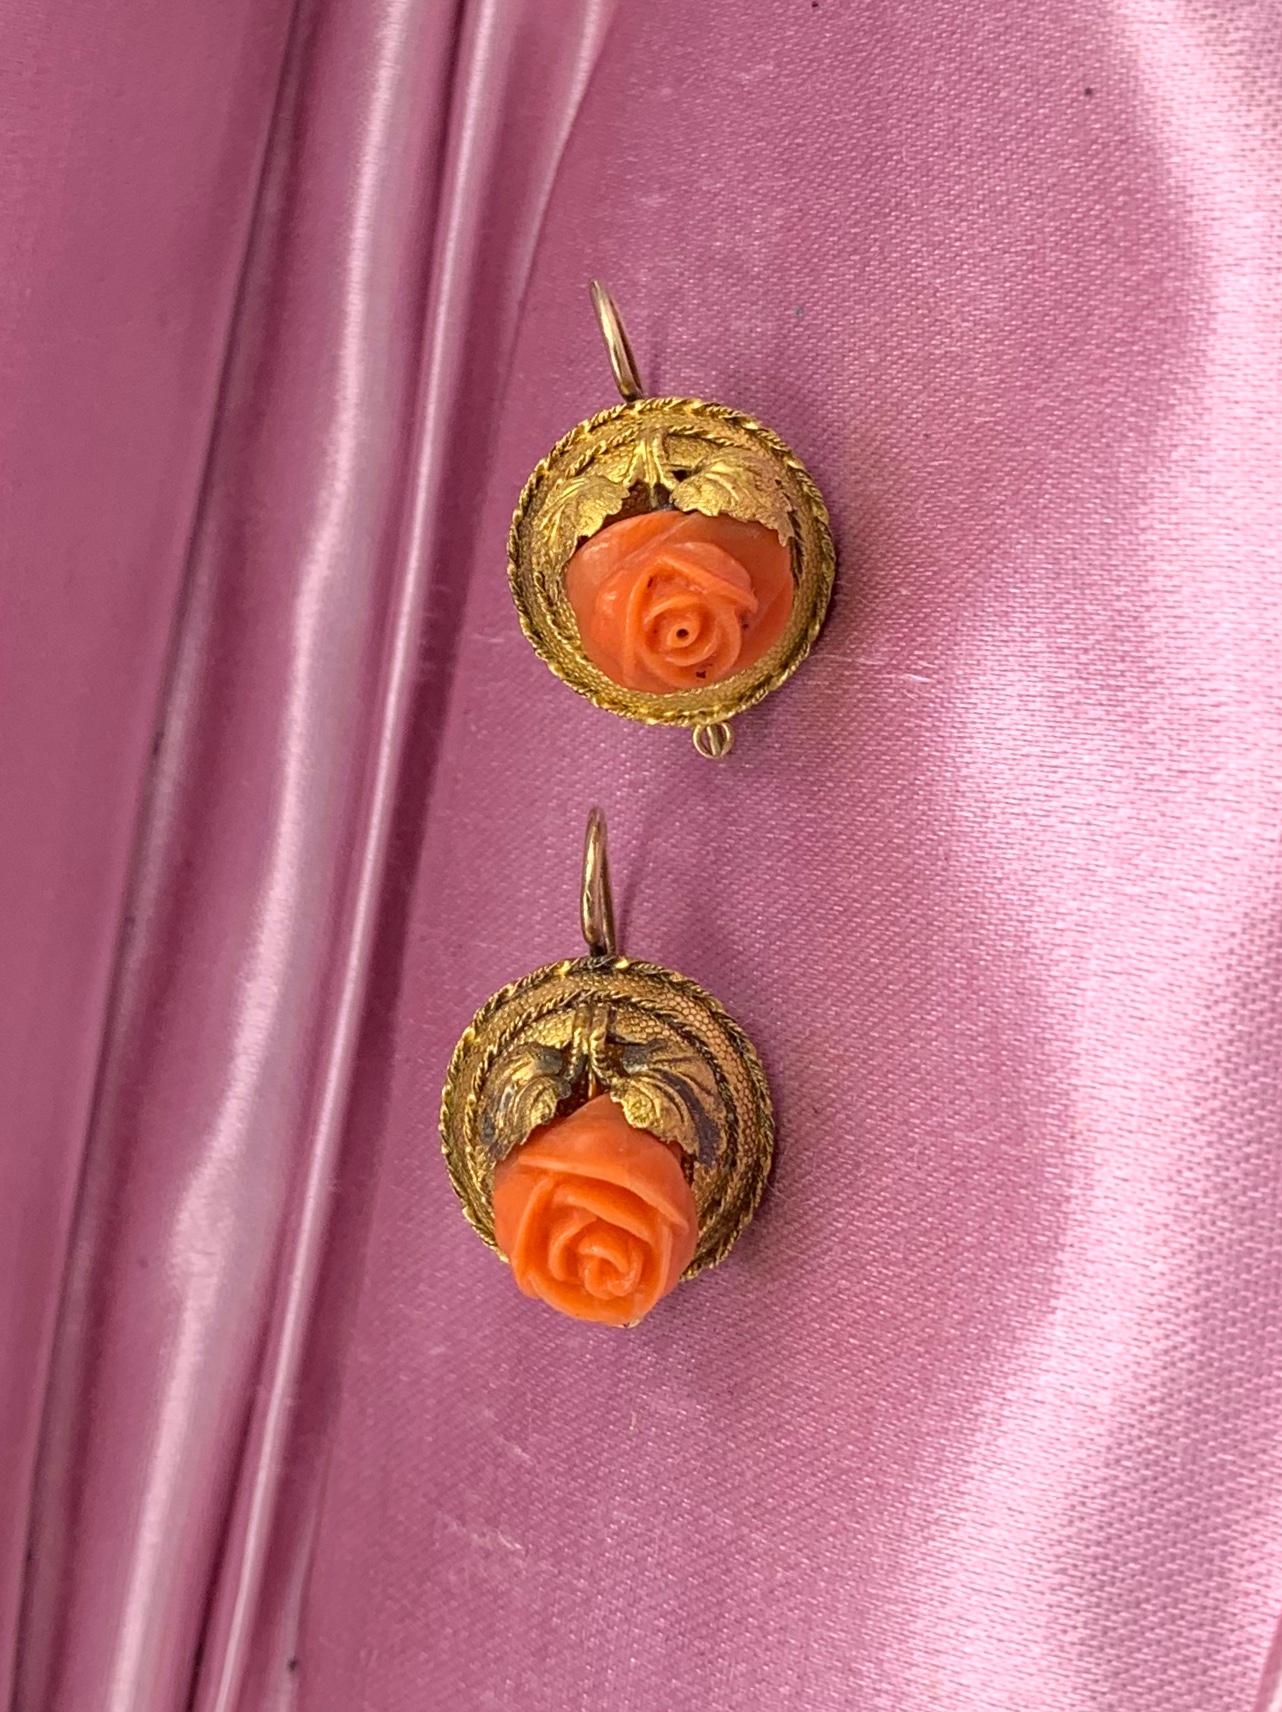 A rare pair of Etruscan Revival Victorian Coral Rose Earrings in 14 Karat Gold.  The earrings with hand carved three dimensional rose flowers of natural salmon coral.  The carving of the flowers is absolutely exquisite!  The flowers are set in a